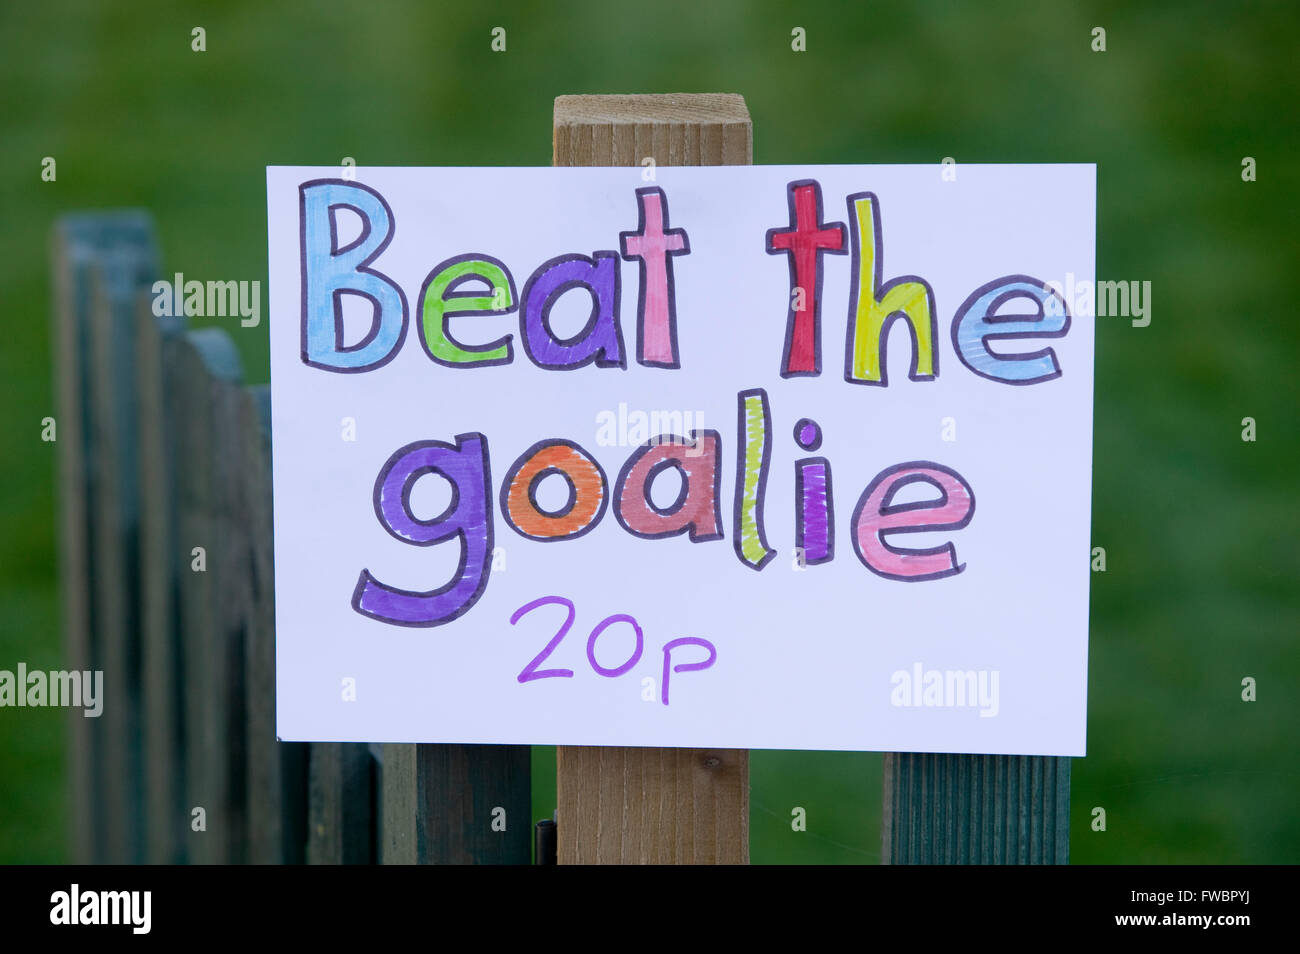 forretning Brug af en computer uklar A sign on a fence at a local village fete advertising a "beat the Goalie"  competition where participants shoot a number of footballs at the goal  keeper and if they achieve a